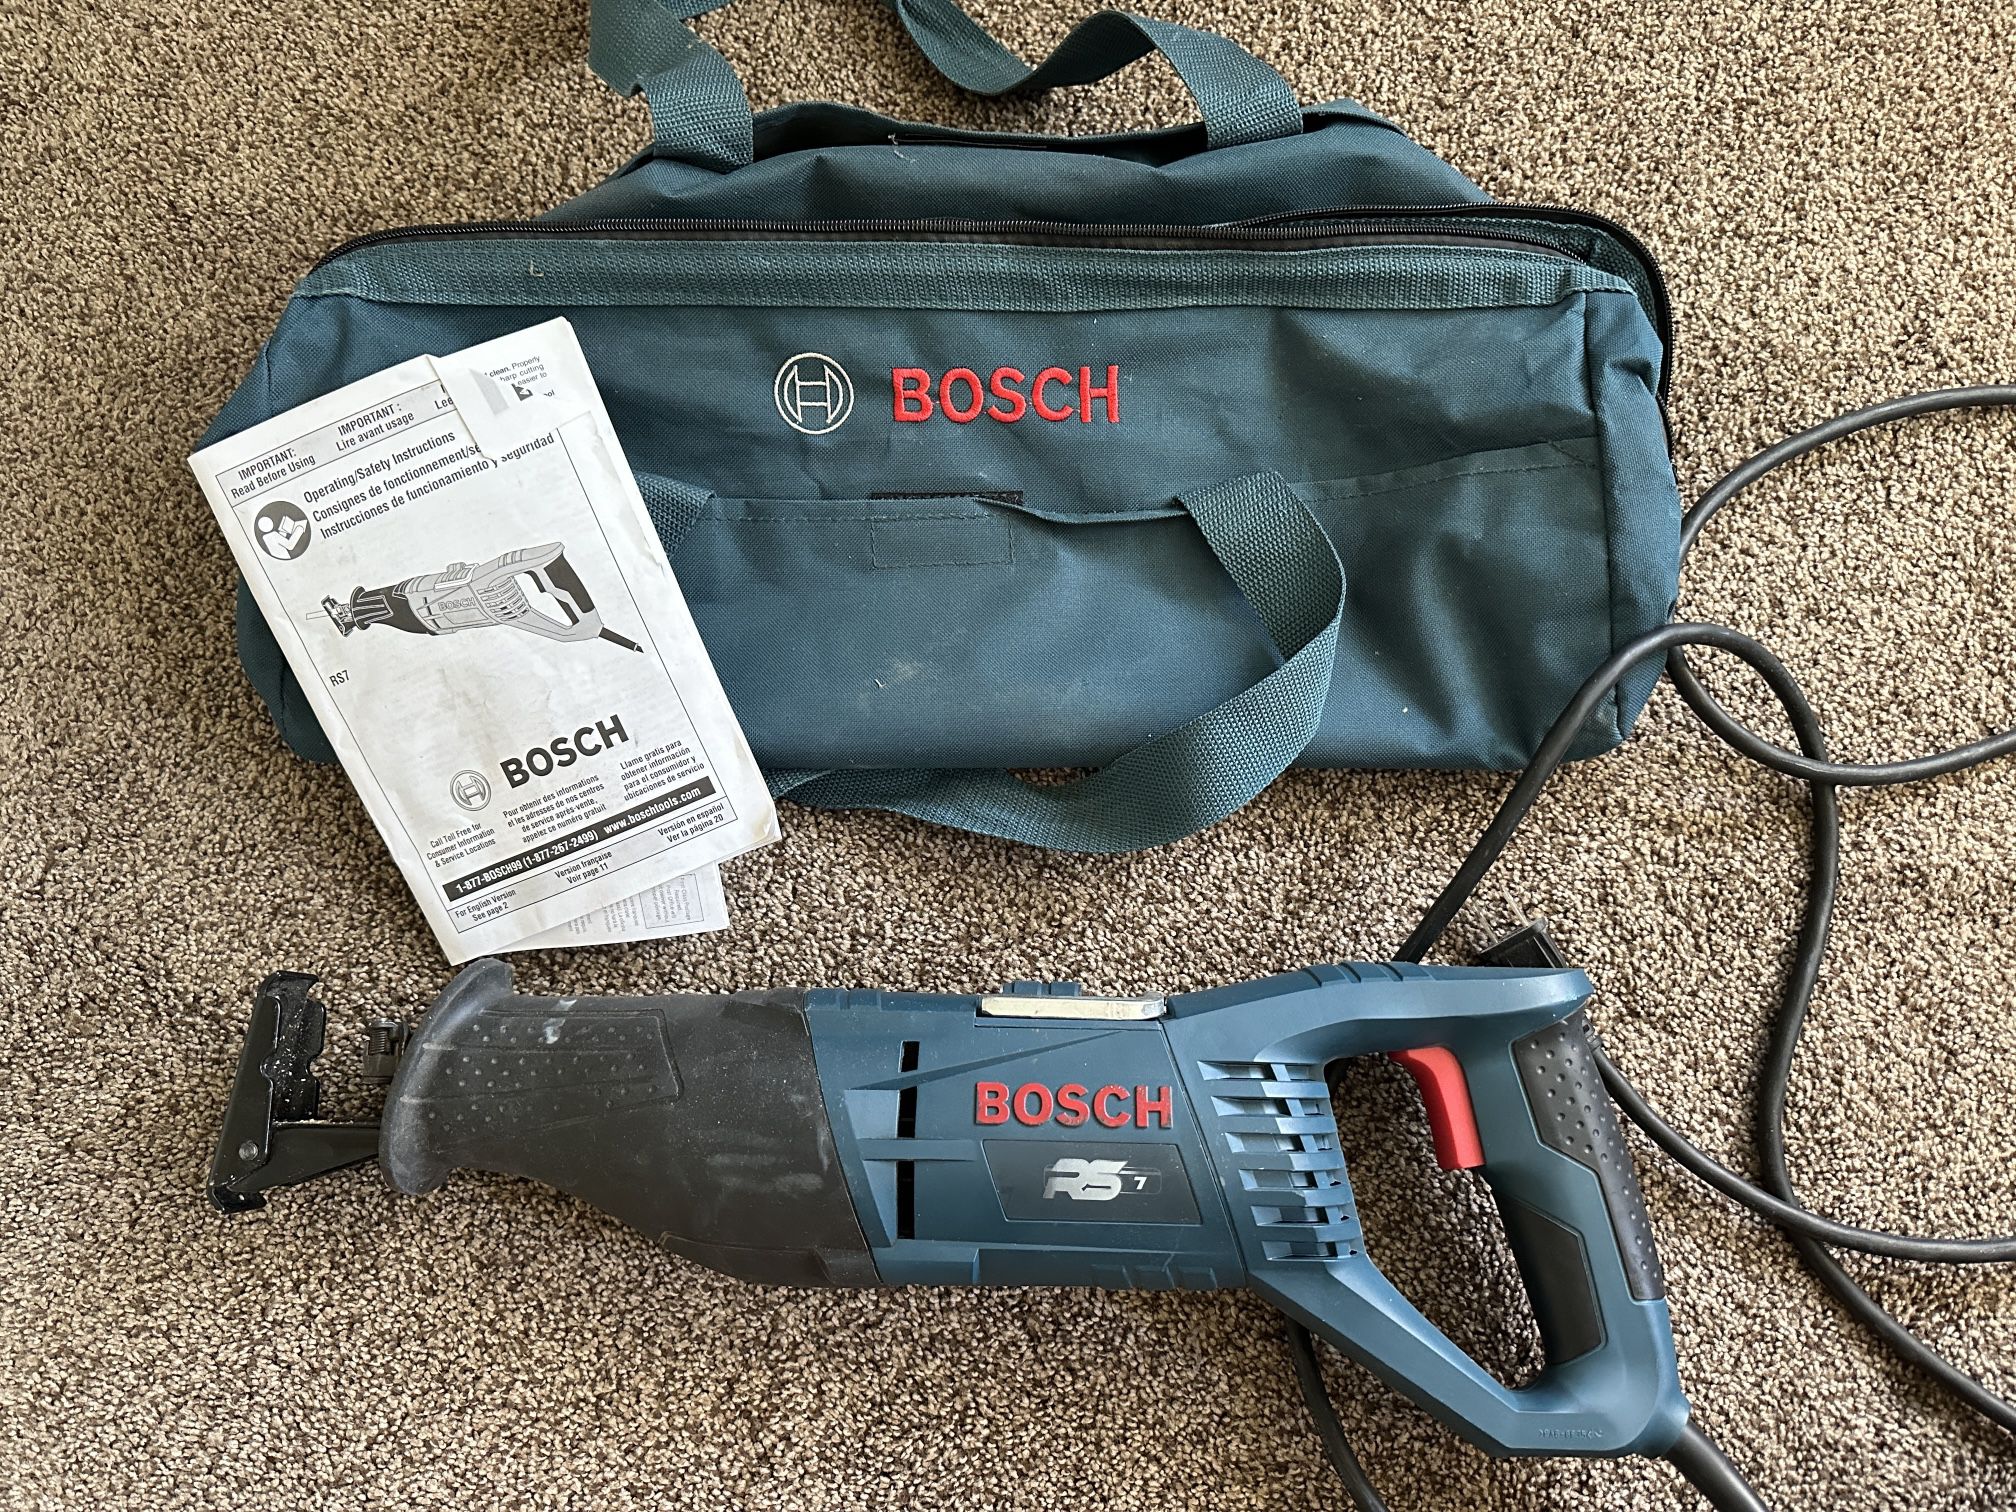 Bosch RS7 Reciprocating Saw Power Tool